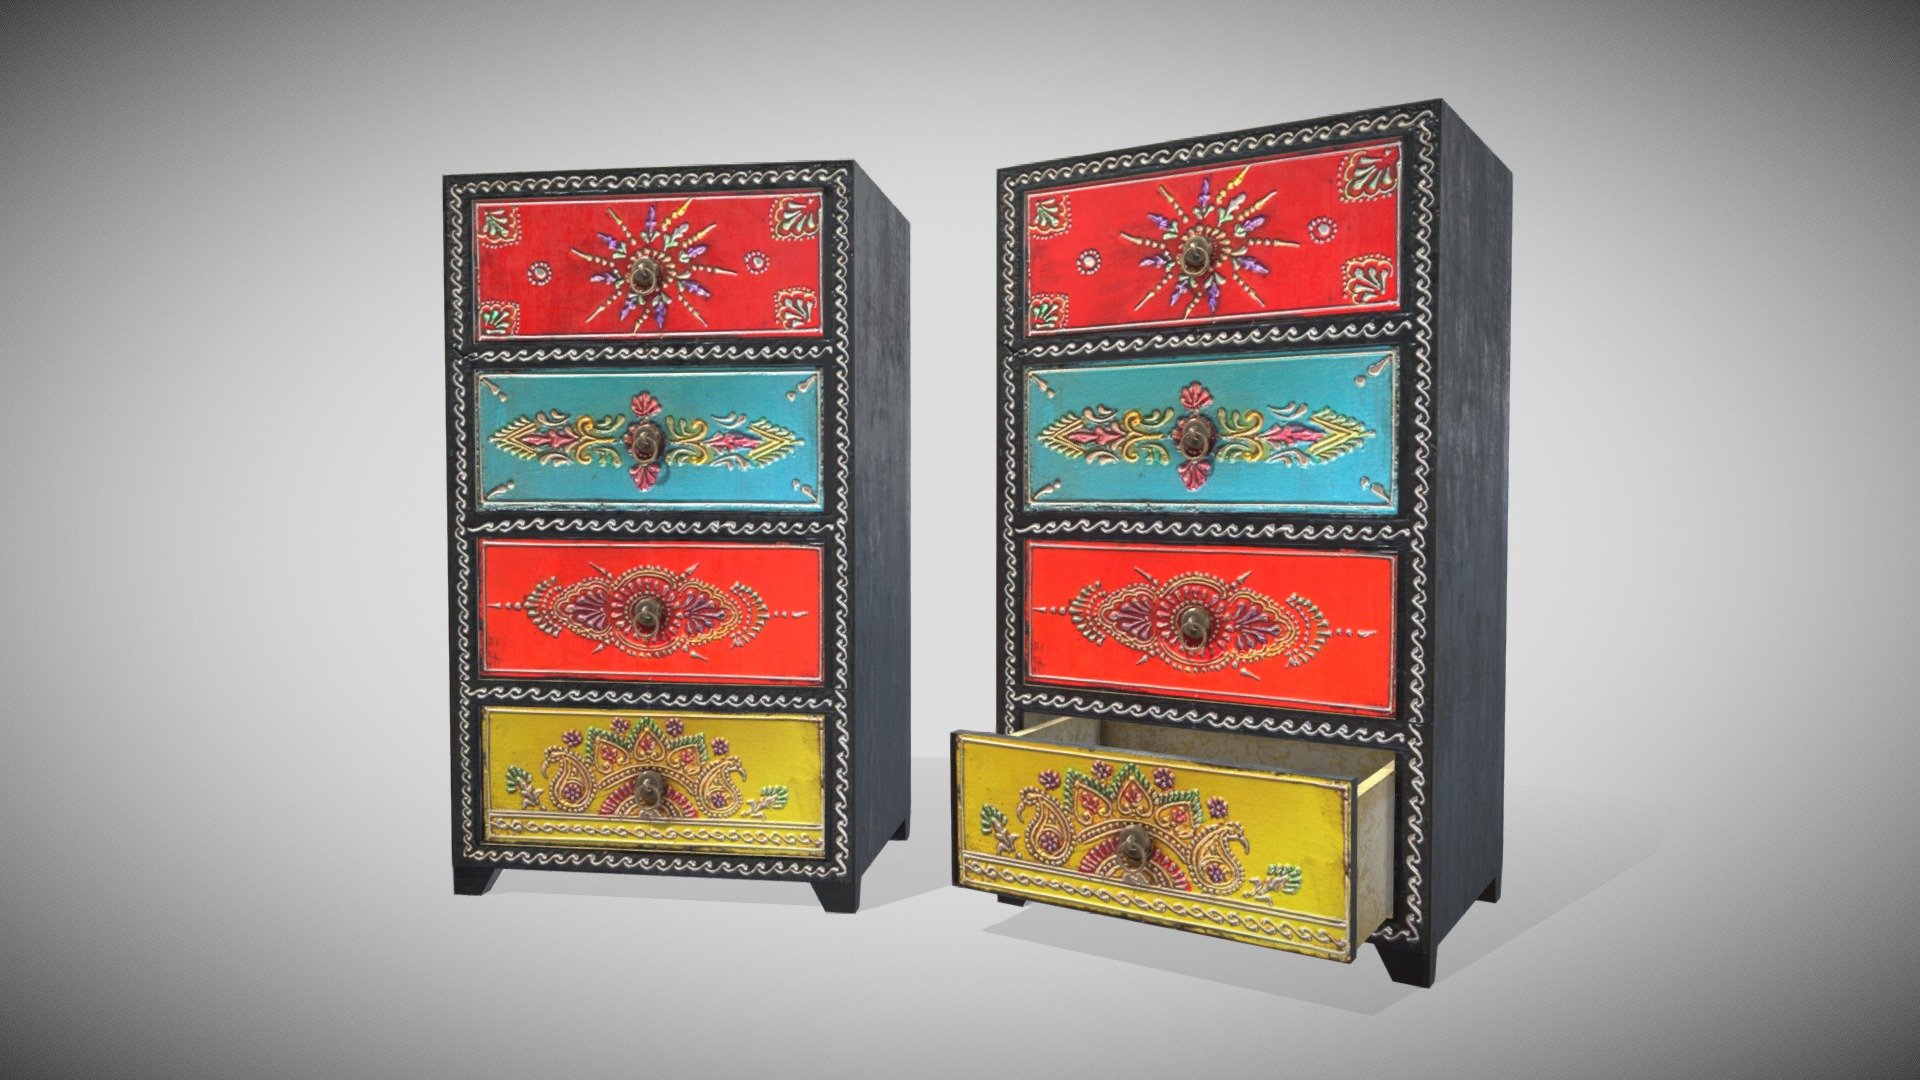 One Material PBR Metalness 4k

All quads - Indian Drawers - Cassettiera_Color - Buy Royalty Free 3D model by Francesco Coldesina (@topfrank2013) 3d model